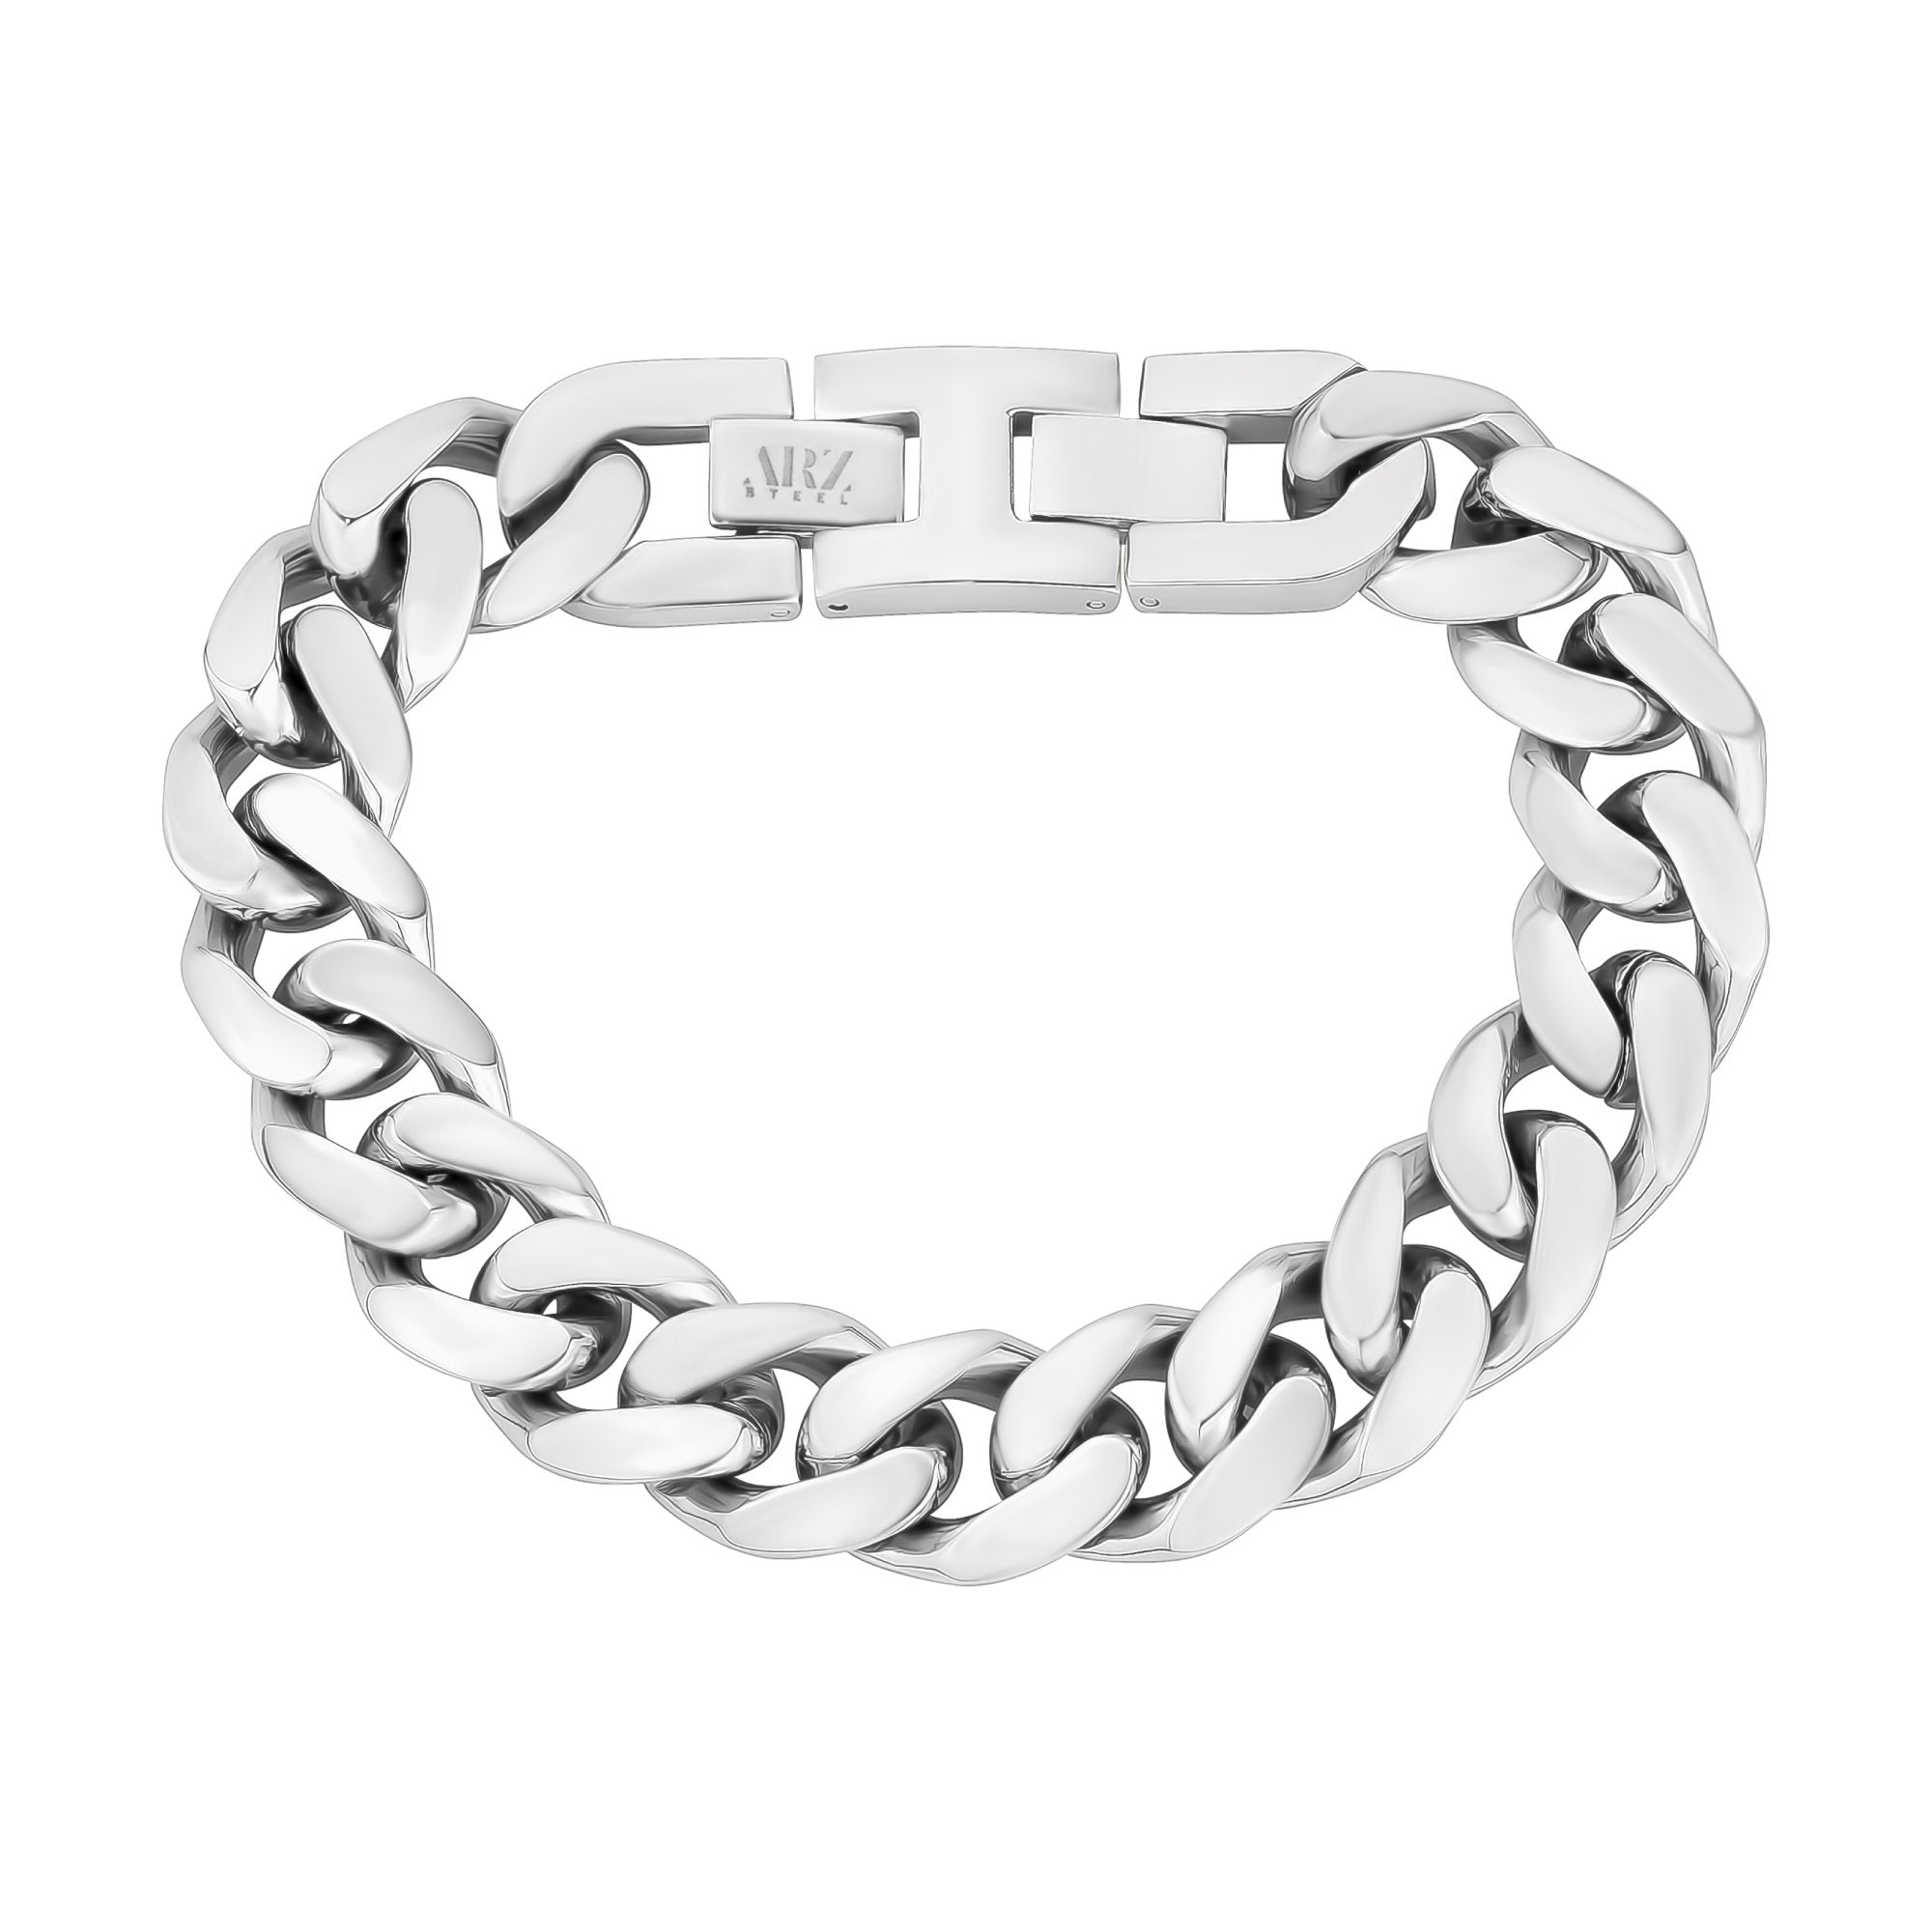 Petit CD Bracelet Silver-Finish Metal with White Crystals | DIOR